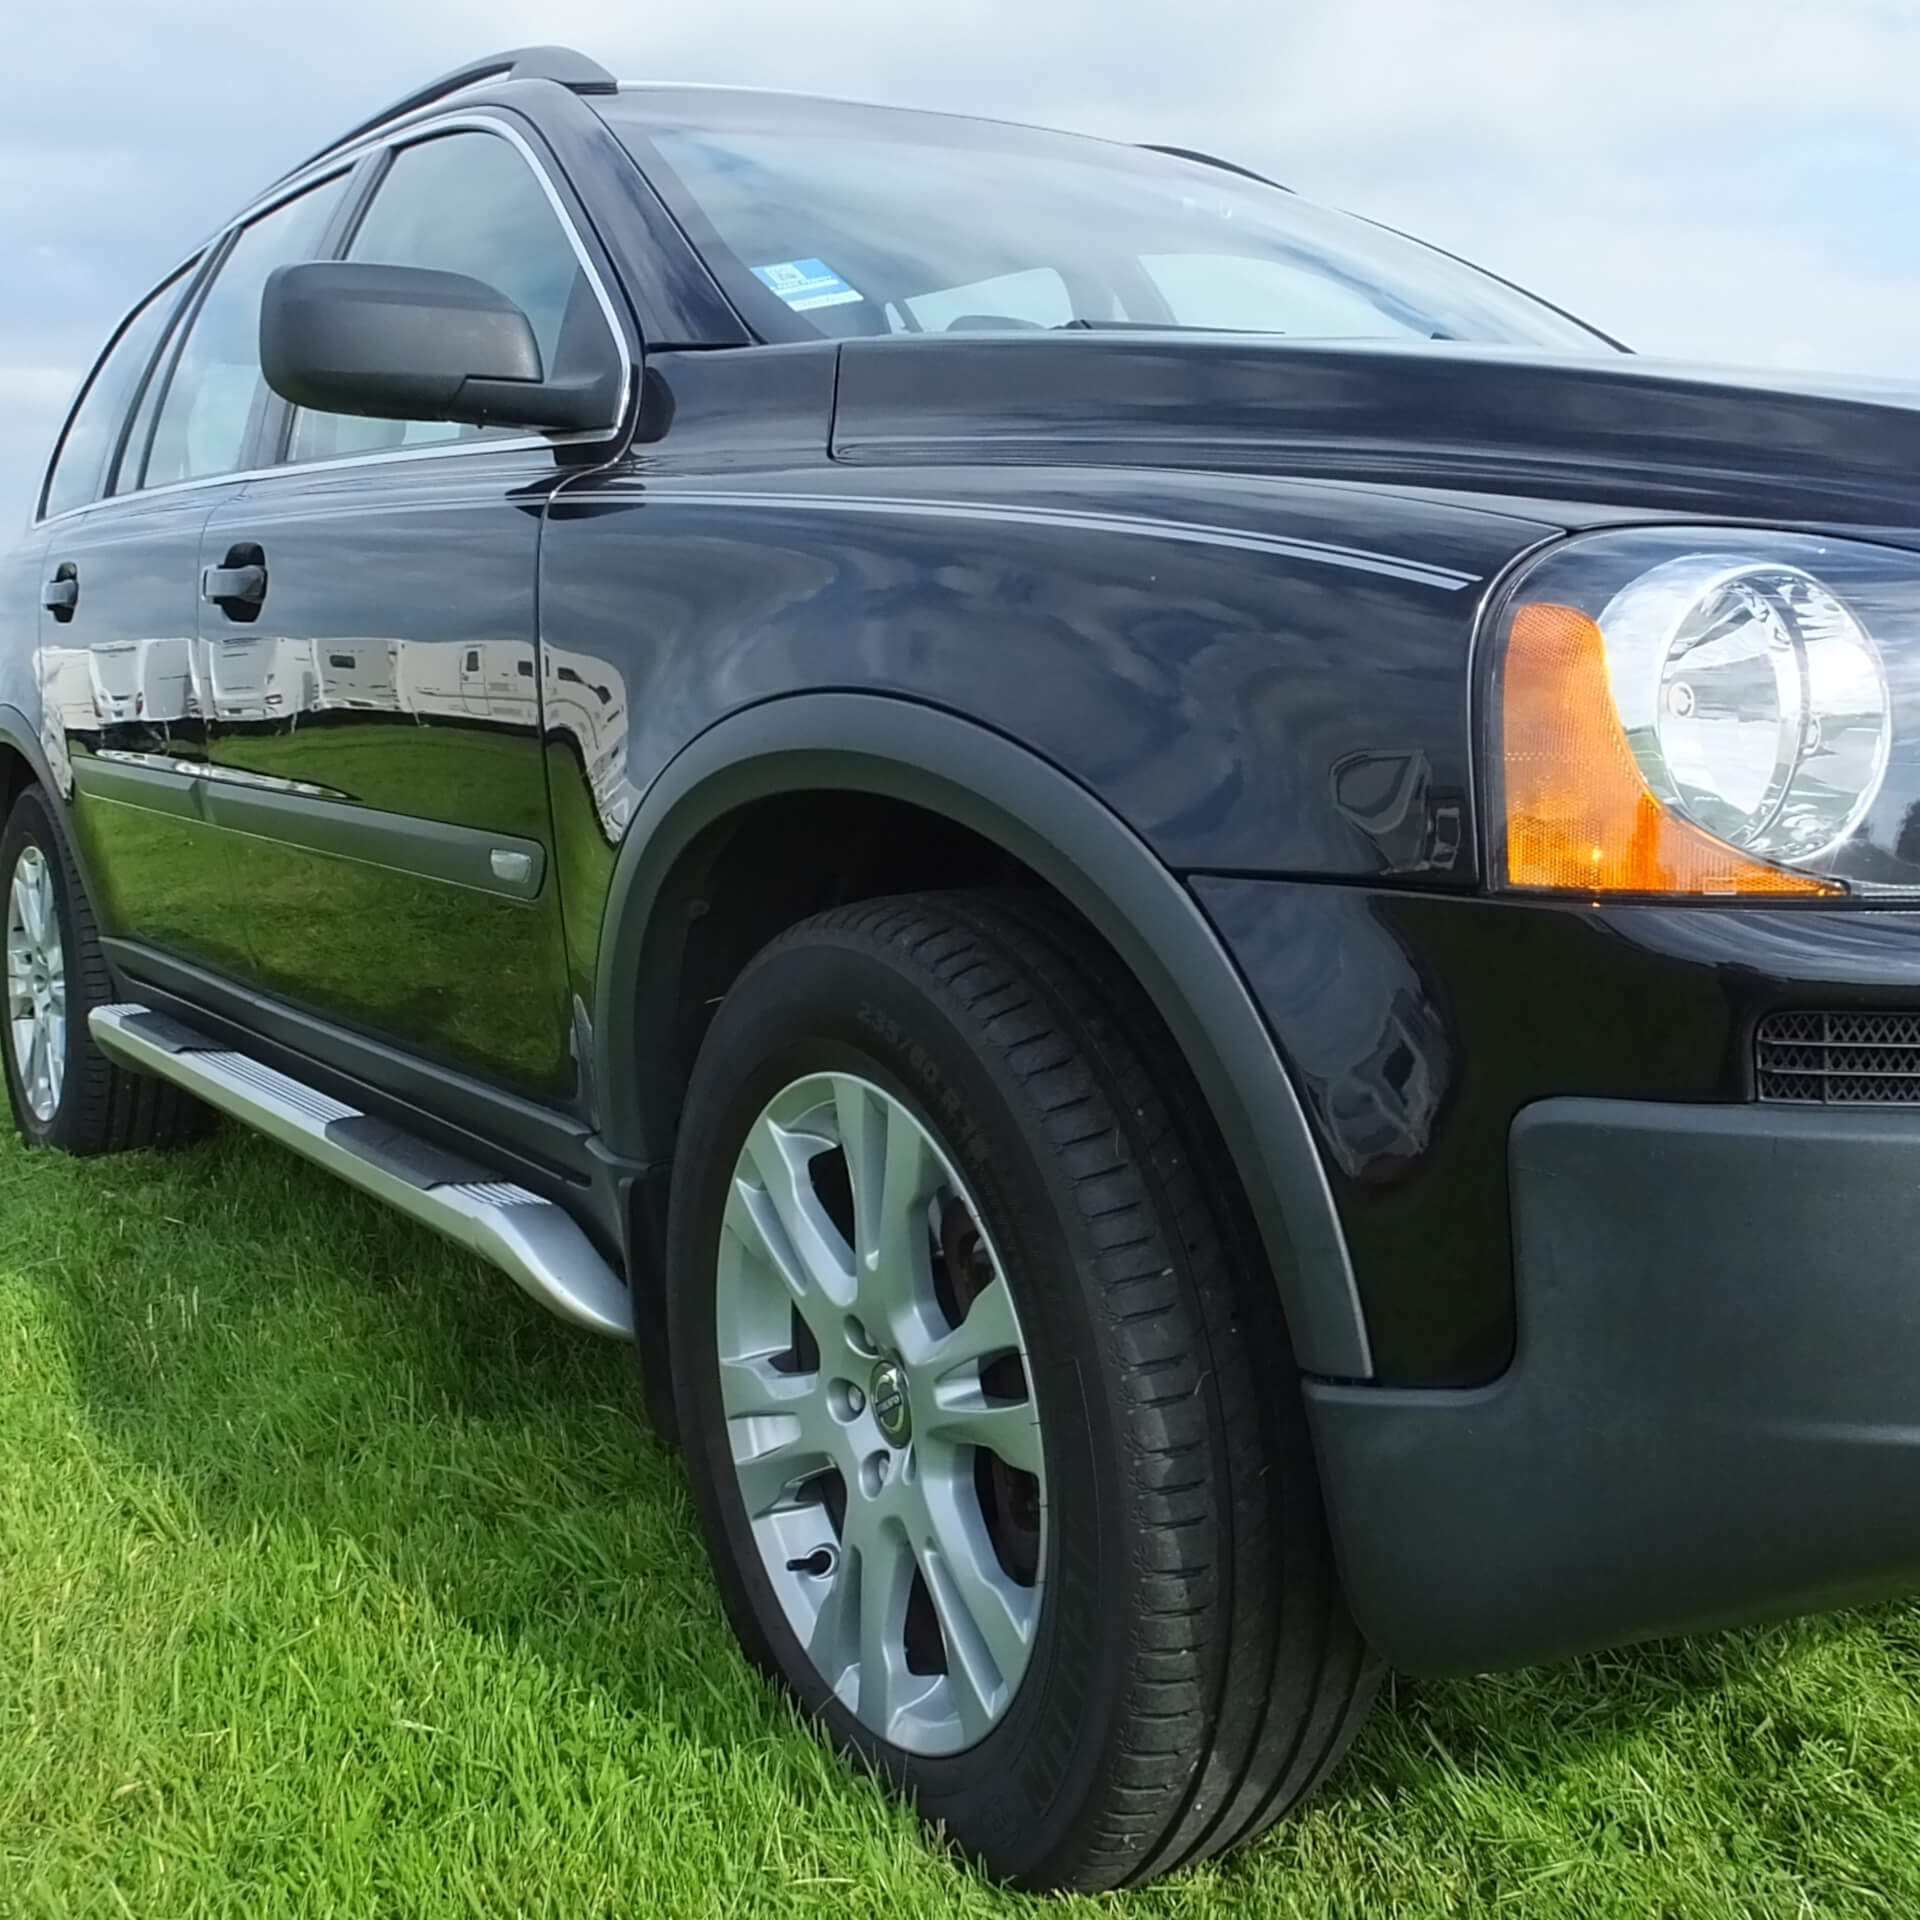 Direct4x4 accessories for Volvo XC90 vehicles with a photo of a black Volvo XC90 parked on grass and fitted with OE style side steps